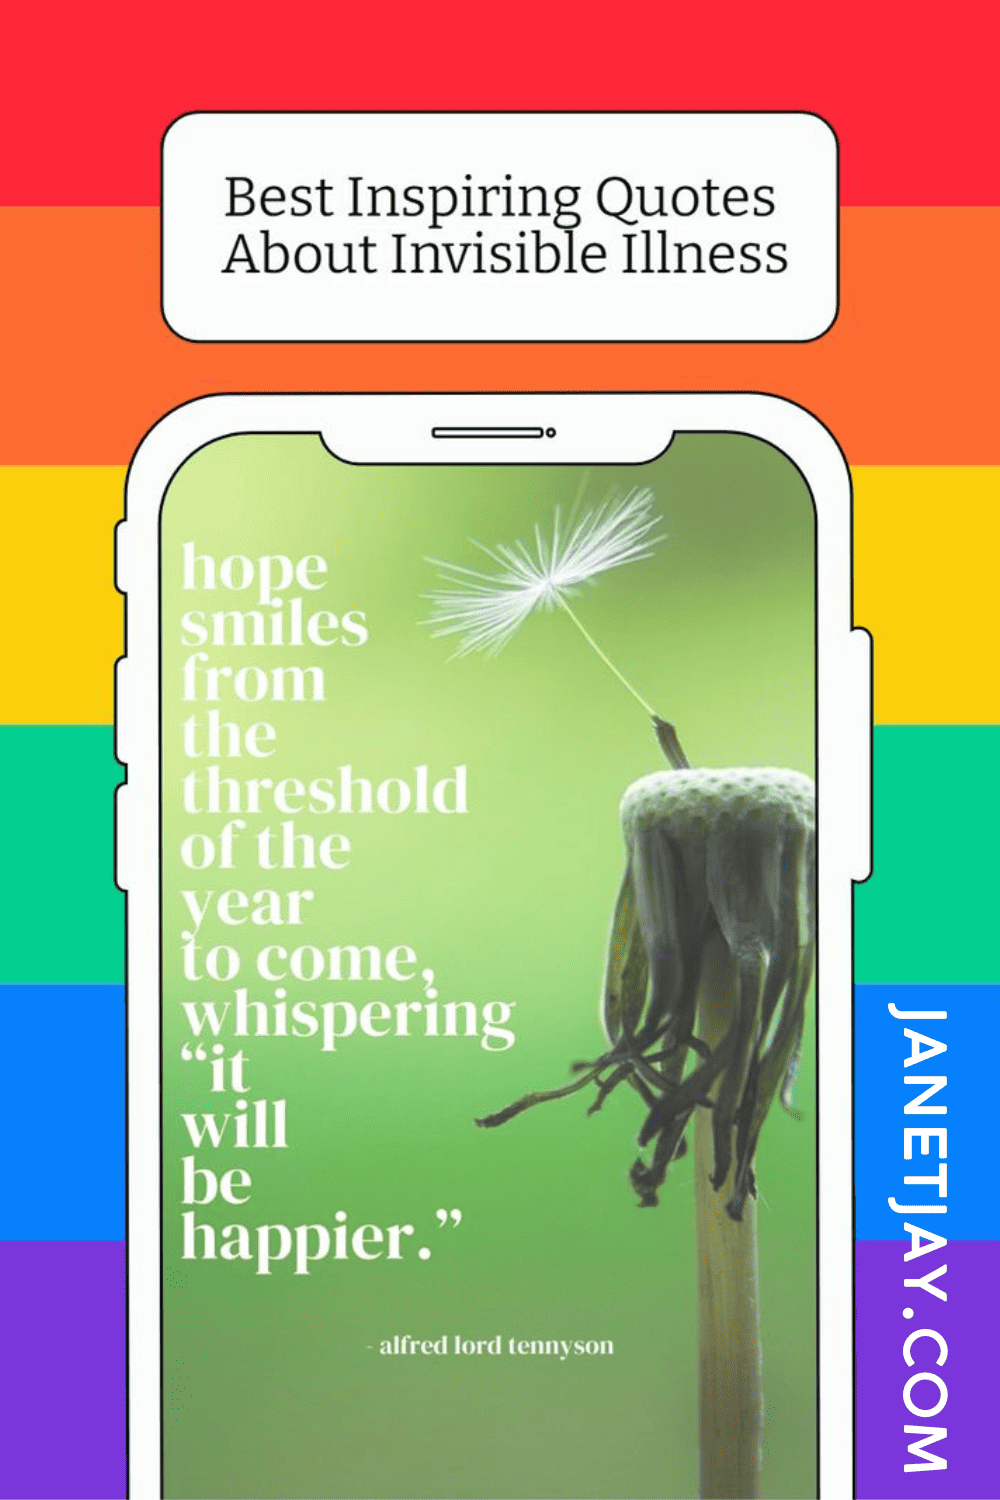 More inspiring quotes about chronic pain-- on a rainbow background, title reads "best inspiring quotes about invisible illness" with a phone outline, within the phone is a green background with a dandelion and texts that reads "hope smiles from the threshold of the year to come, whispering 'it will be happier.'" janetjay.com